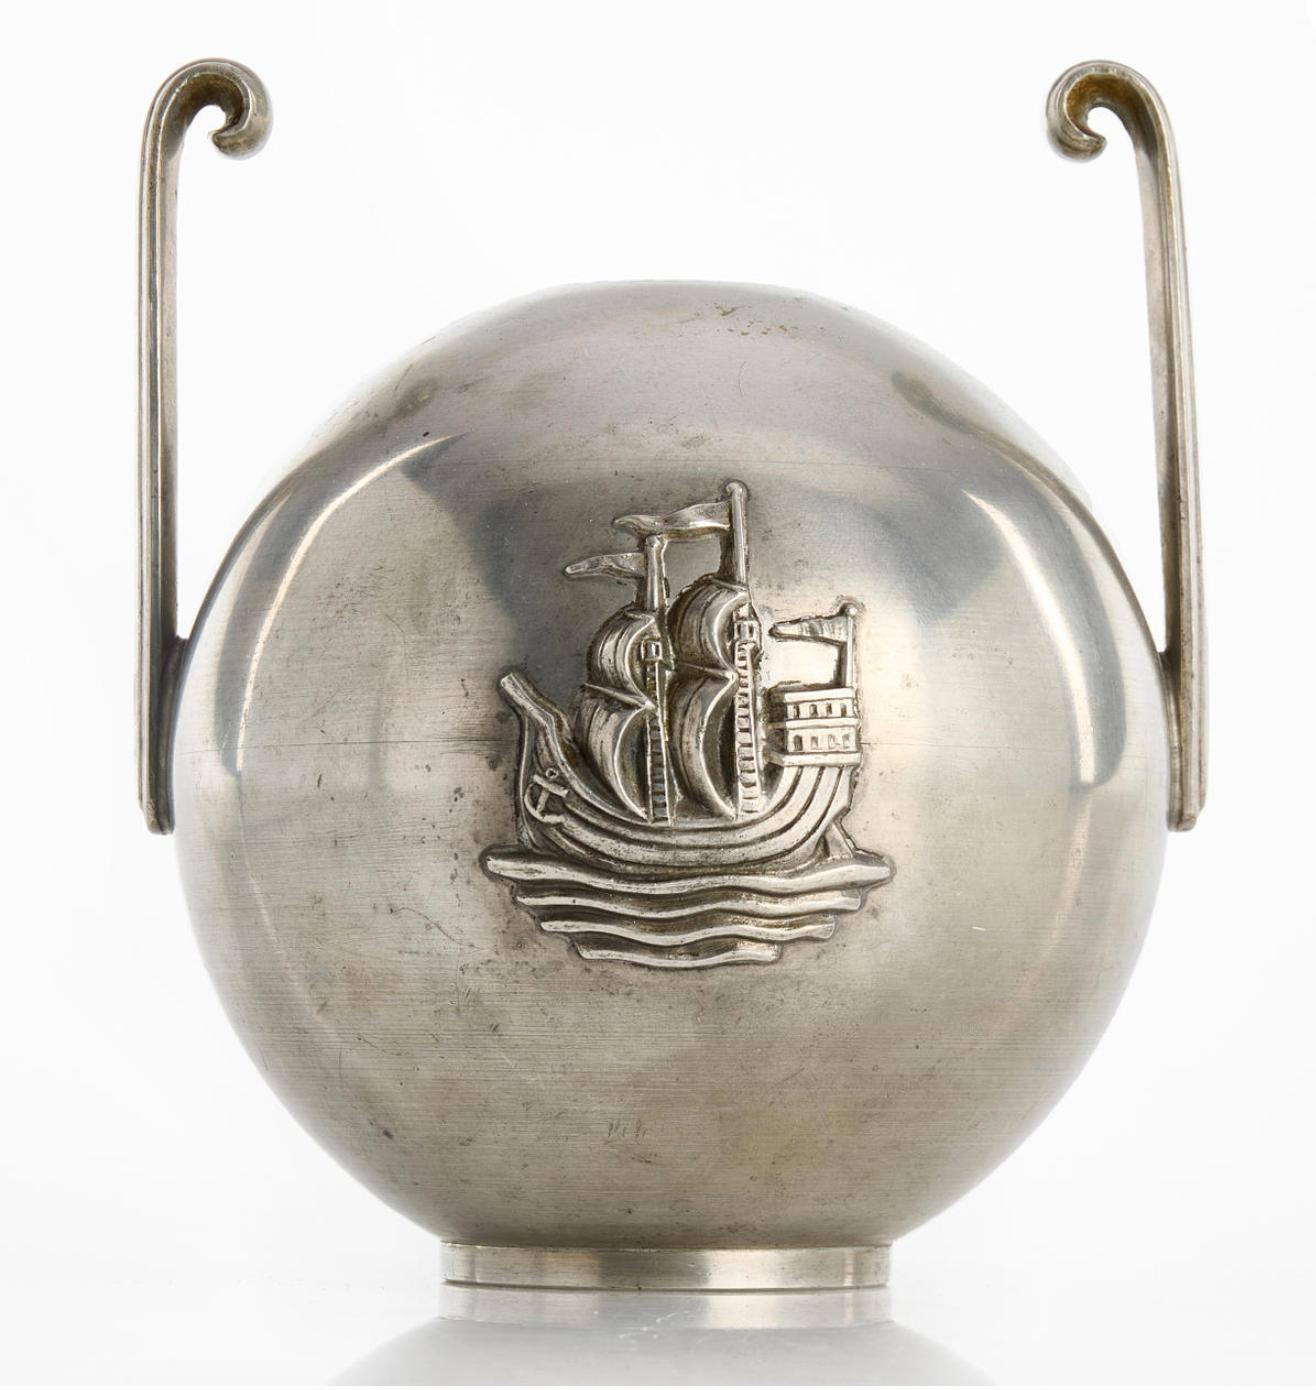  A pewter vase by C.G Hallberg, Stockholm 1929, with relief decoration of ships. 